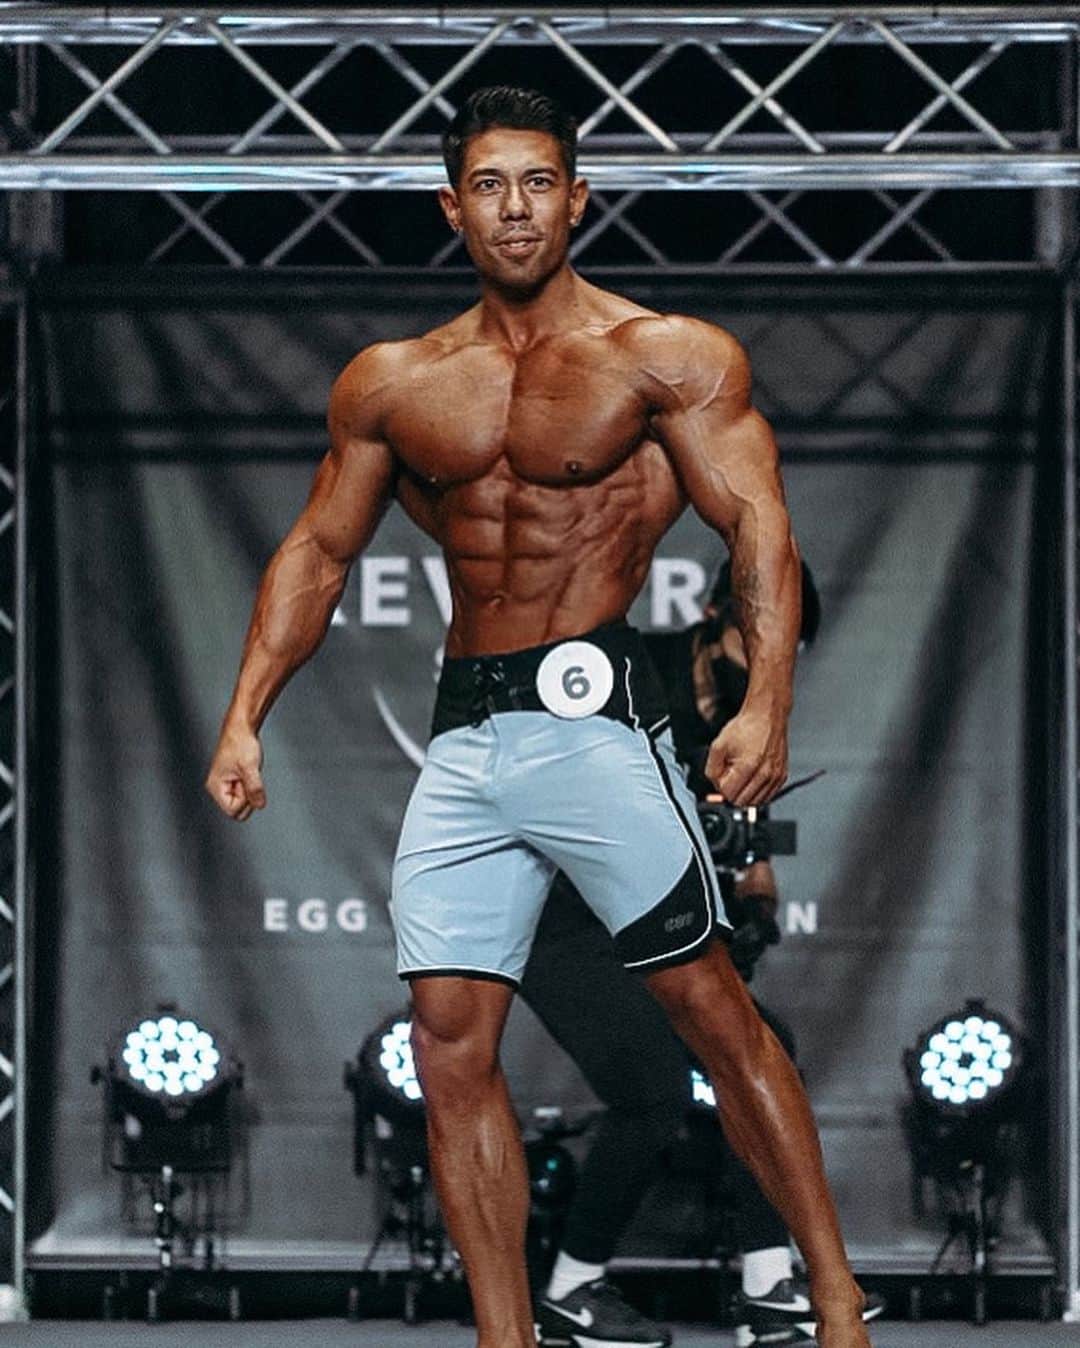 Kanekin Fitnessのインスタグラム：「Throwback to August 2022. Men’s Physique is changing, and so am I. Excited for the challenges that await this year.   @mensphysiquenews  @team_fwj   今年のチャレンジが楽しみ！」